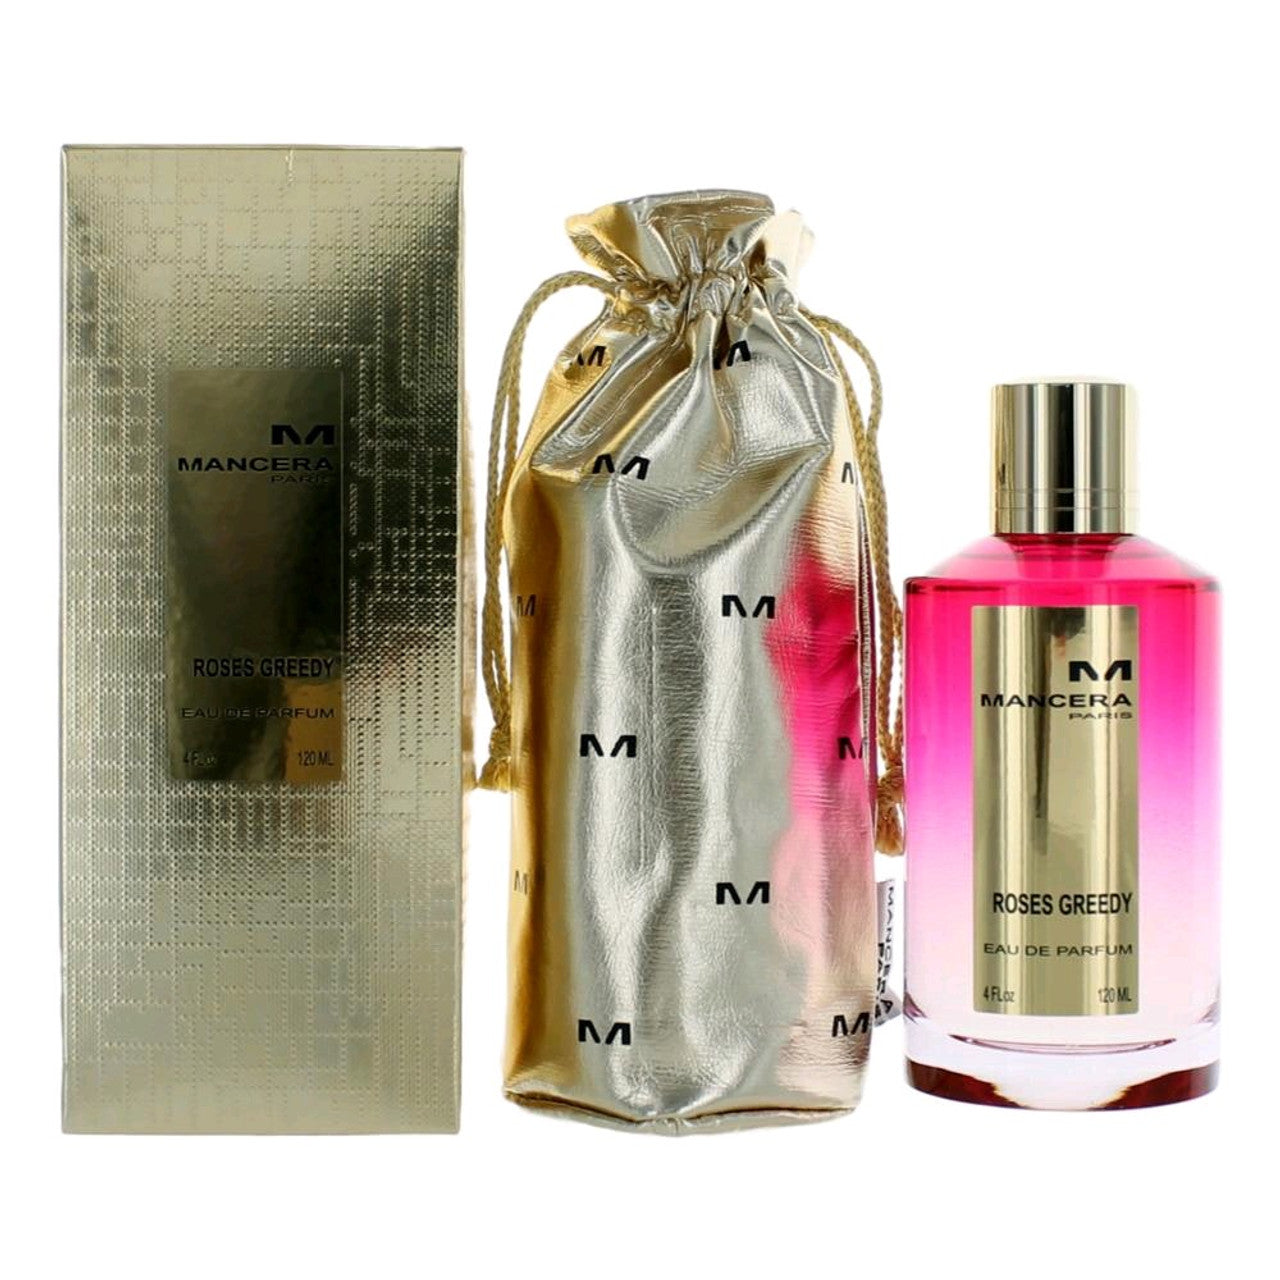 4 oz. bottle of mancera's roses greedy perfume along with gold packaging